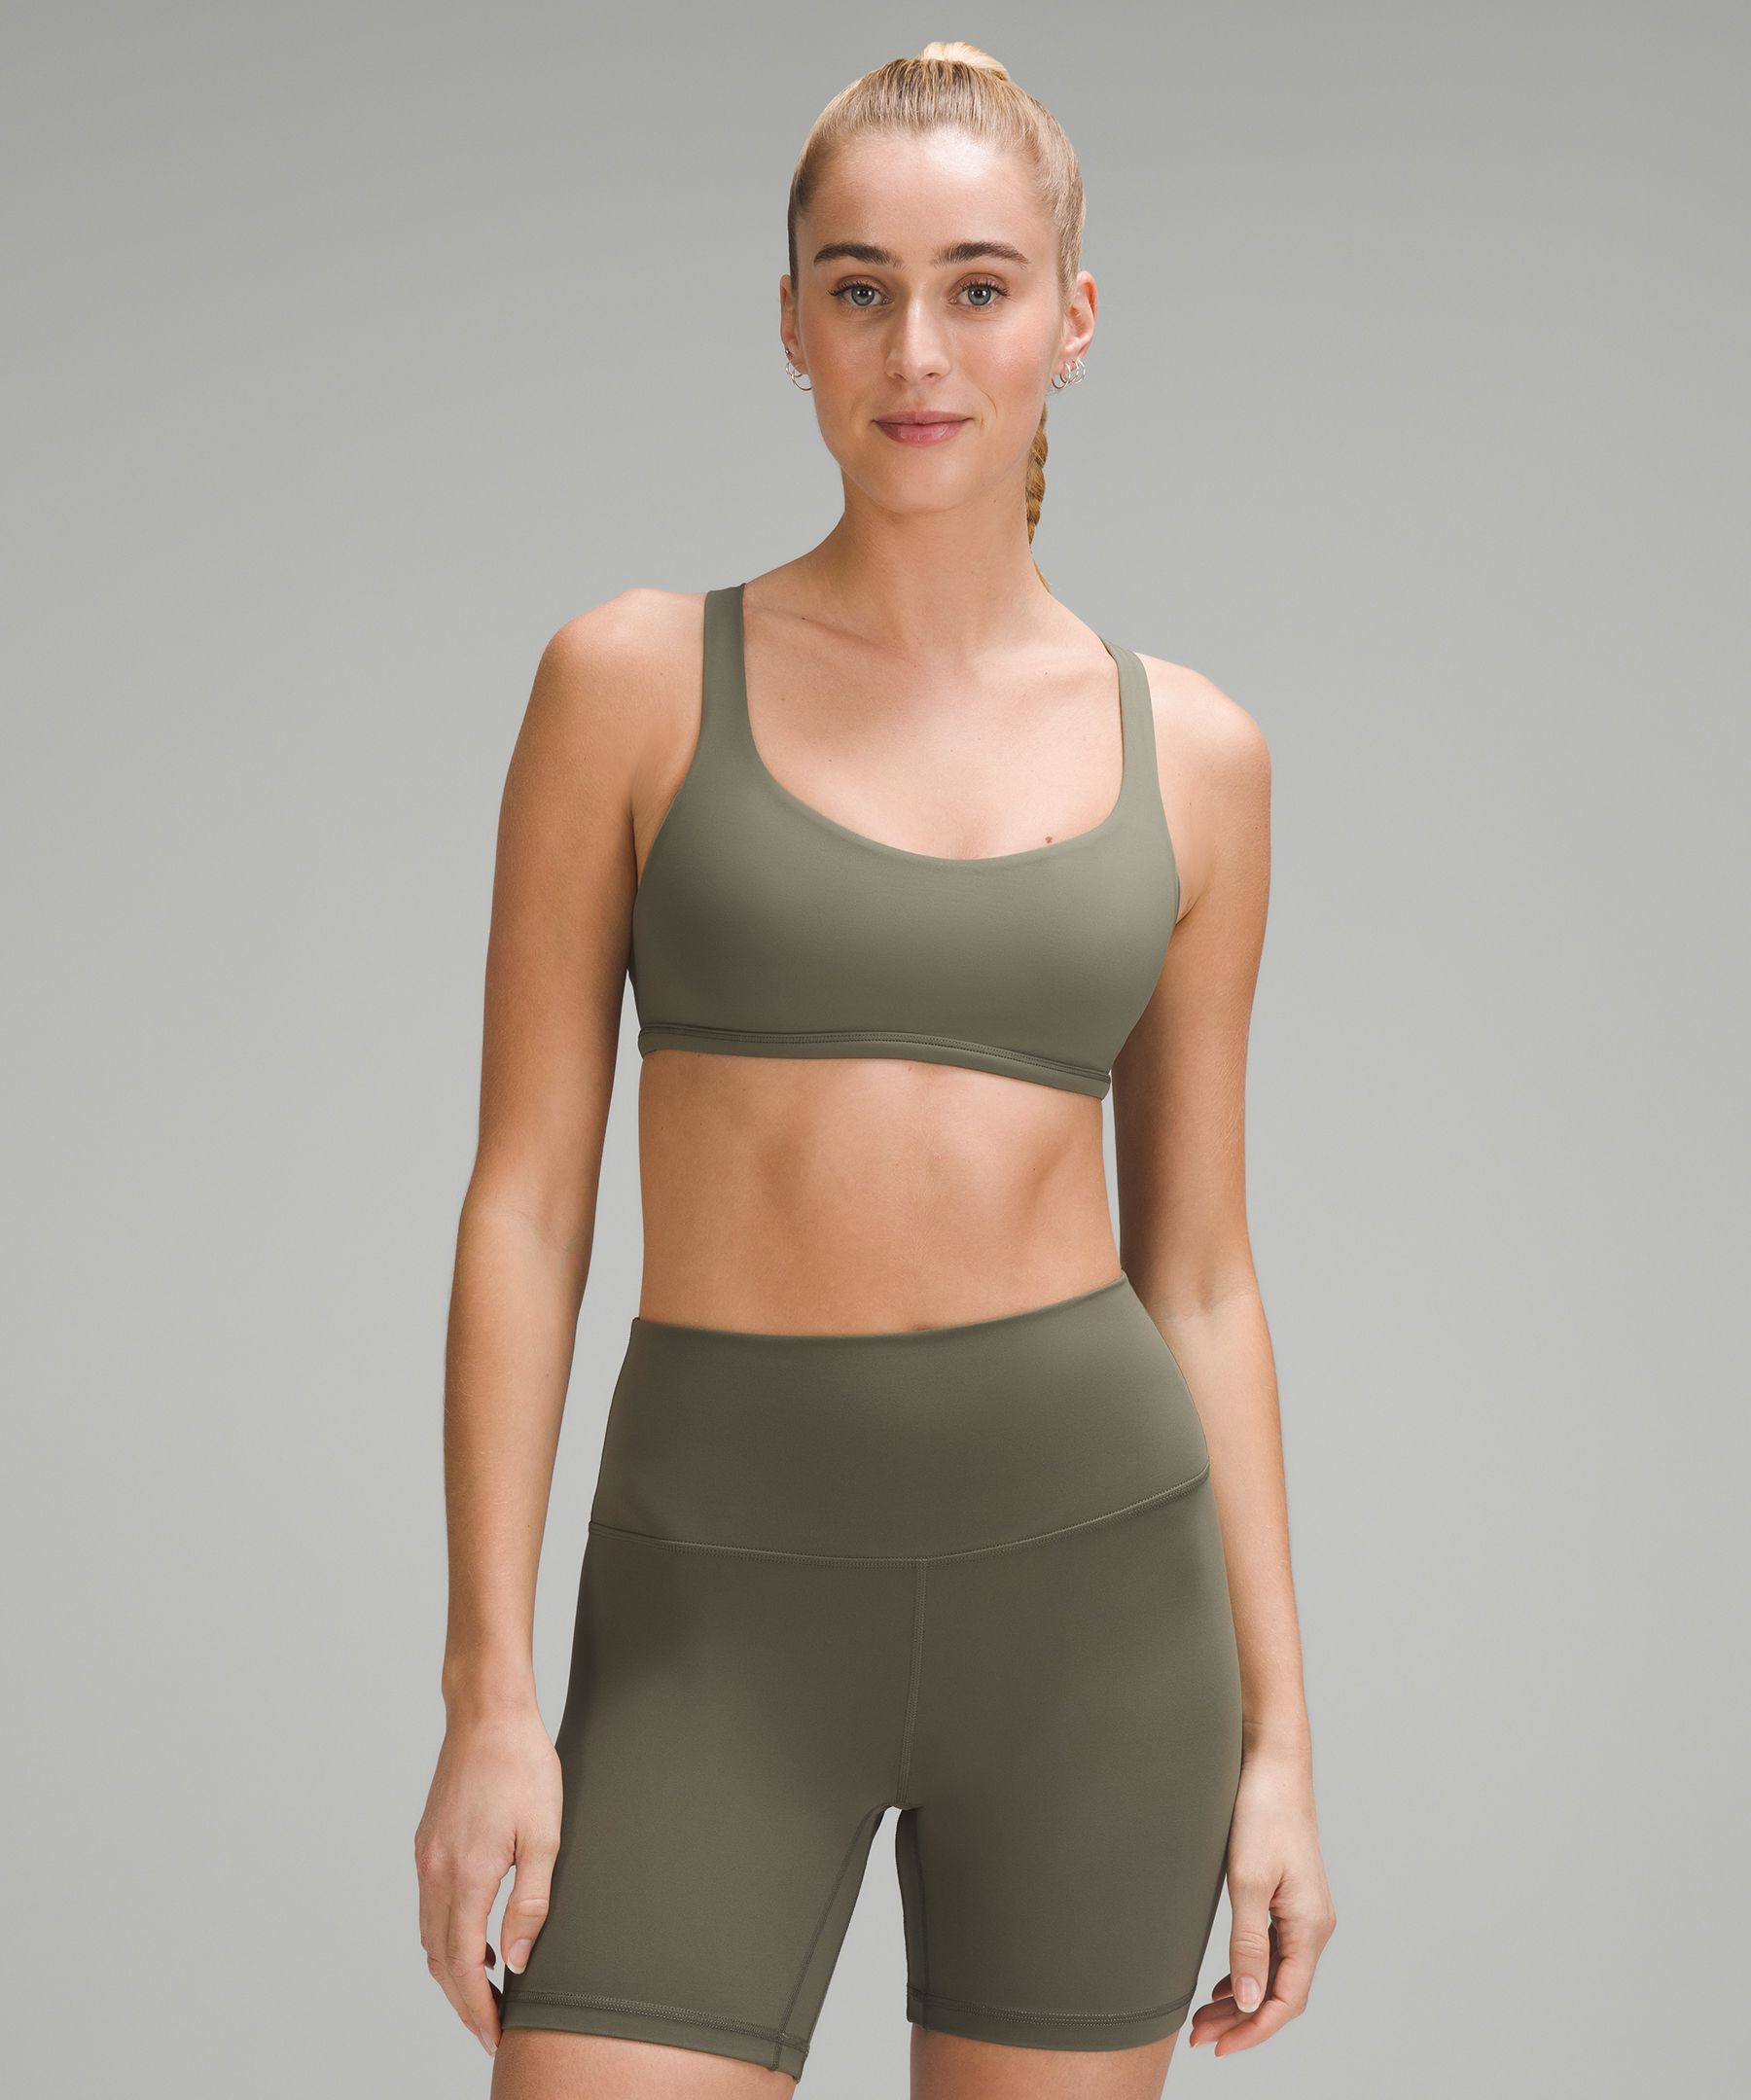 Lululemon athletica Free to Be Bra - Wild *Light Support, A/B Cup